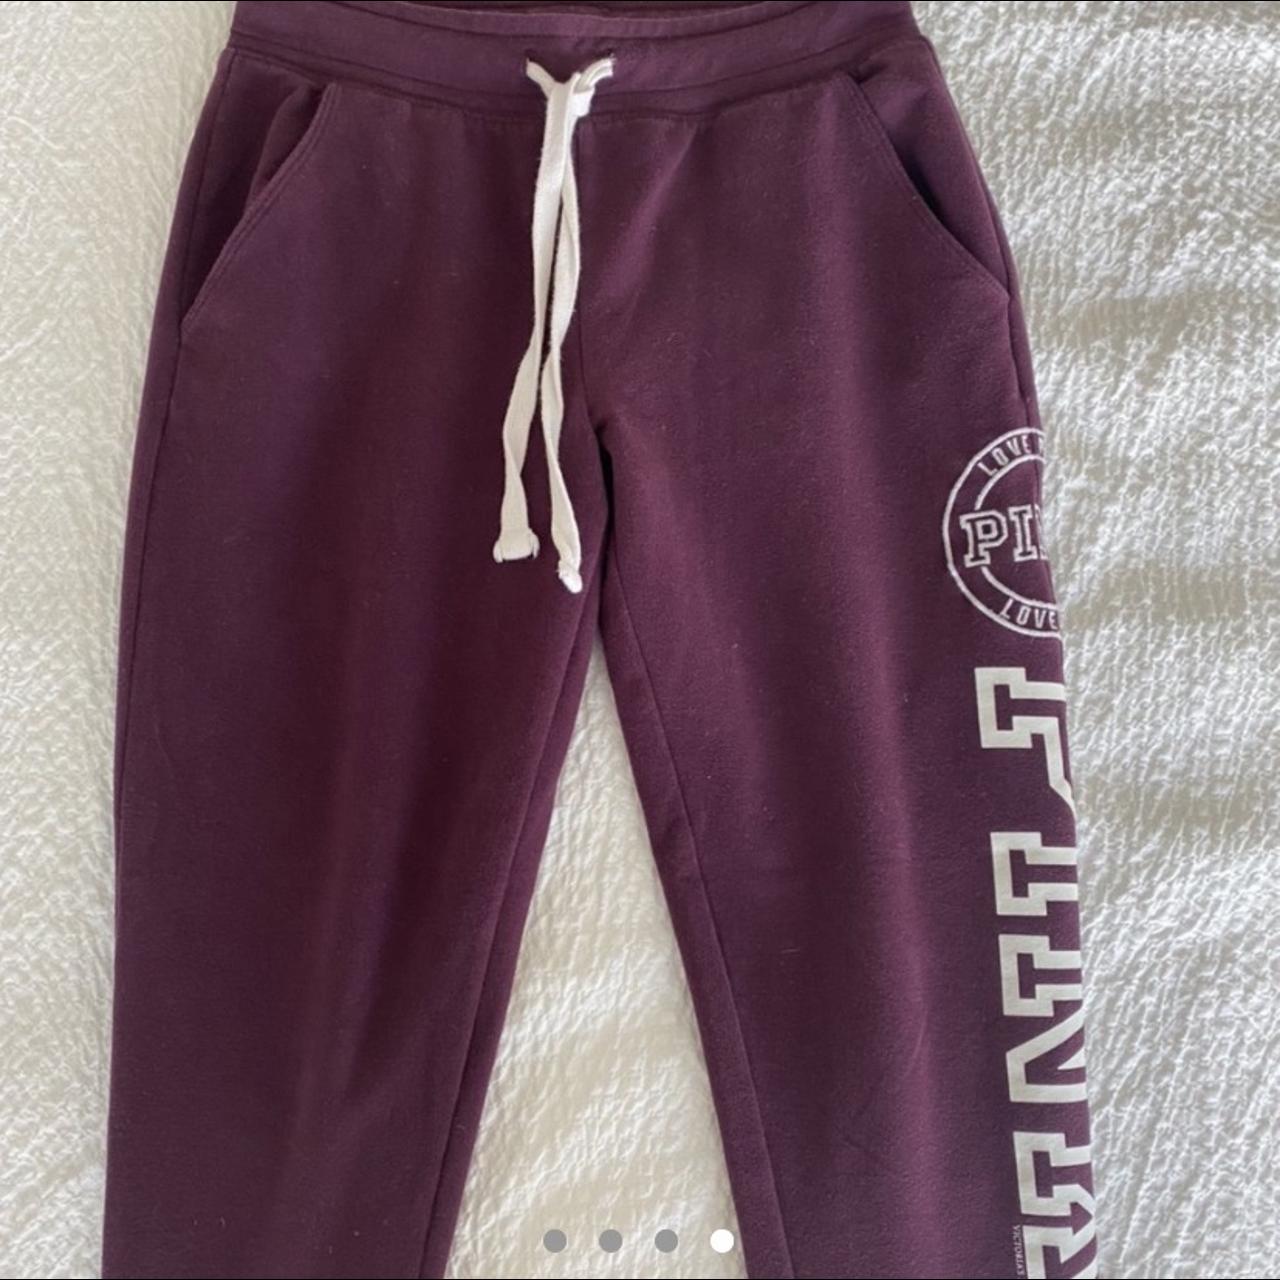 Burgundy joggers from Pink by Victoria’s Secret